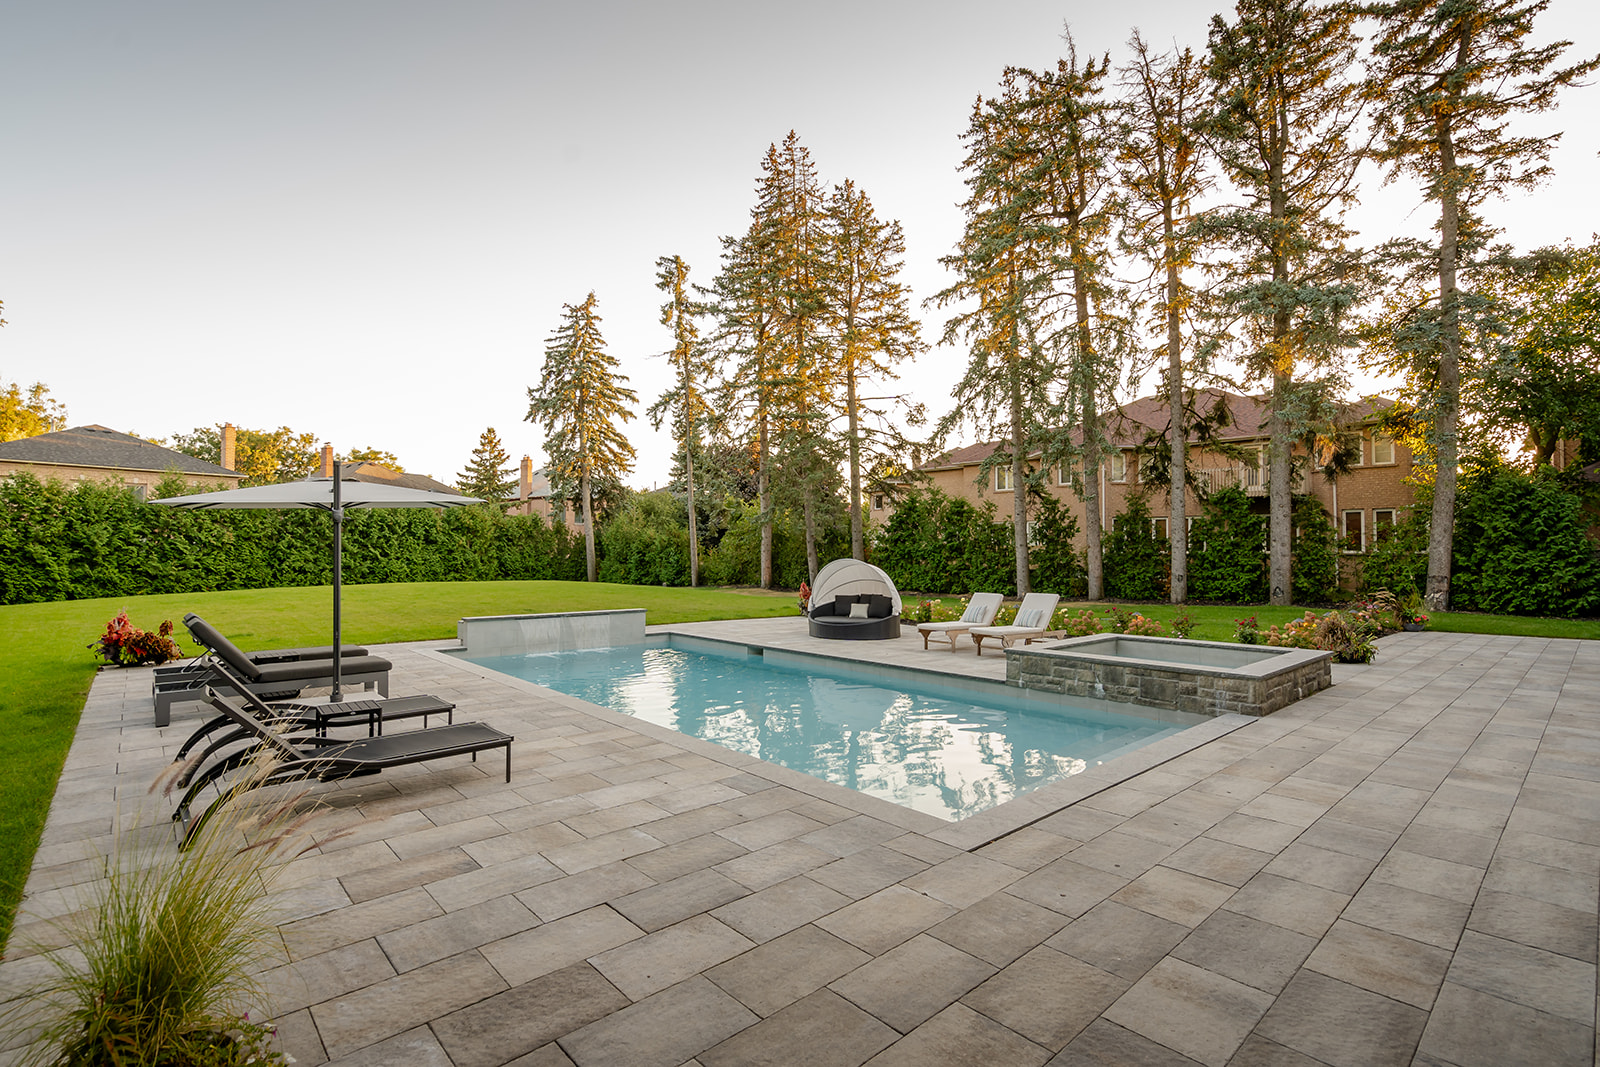 A backyard with an inground pool and the jacuzzi on the far right and outdoor furniture.